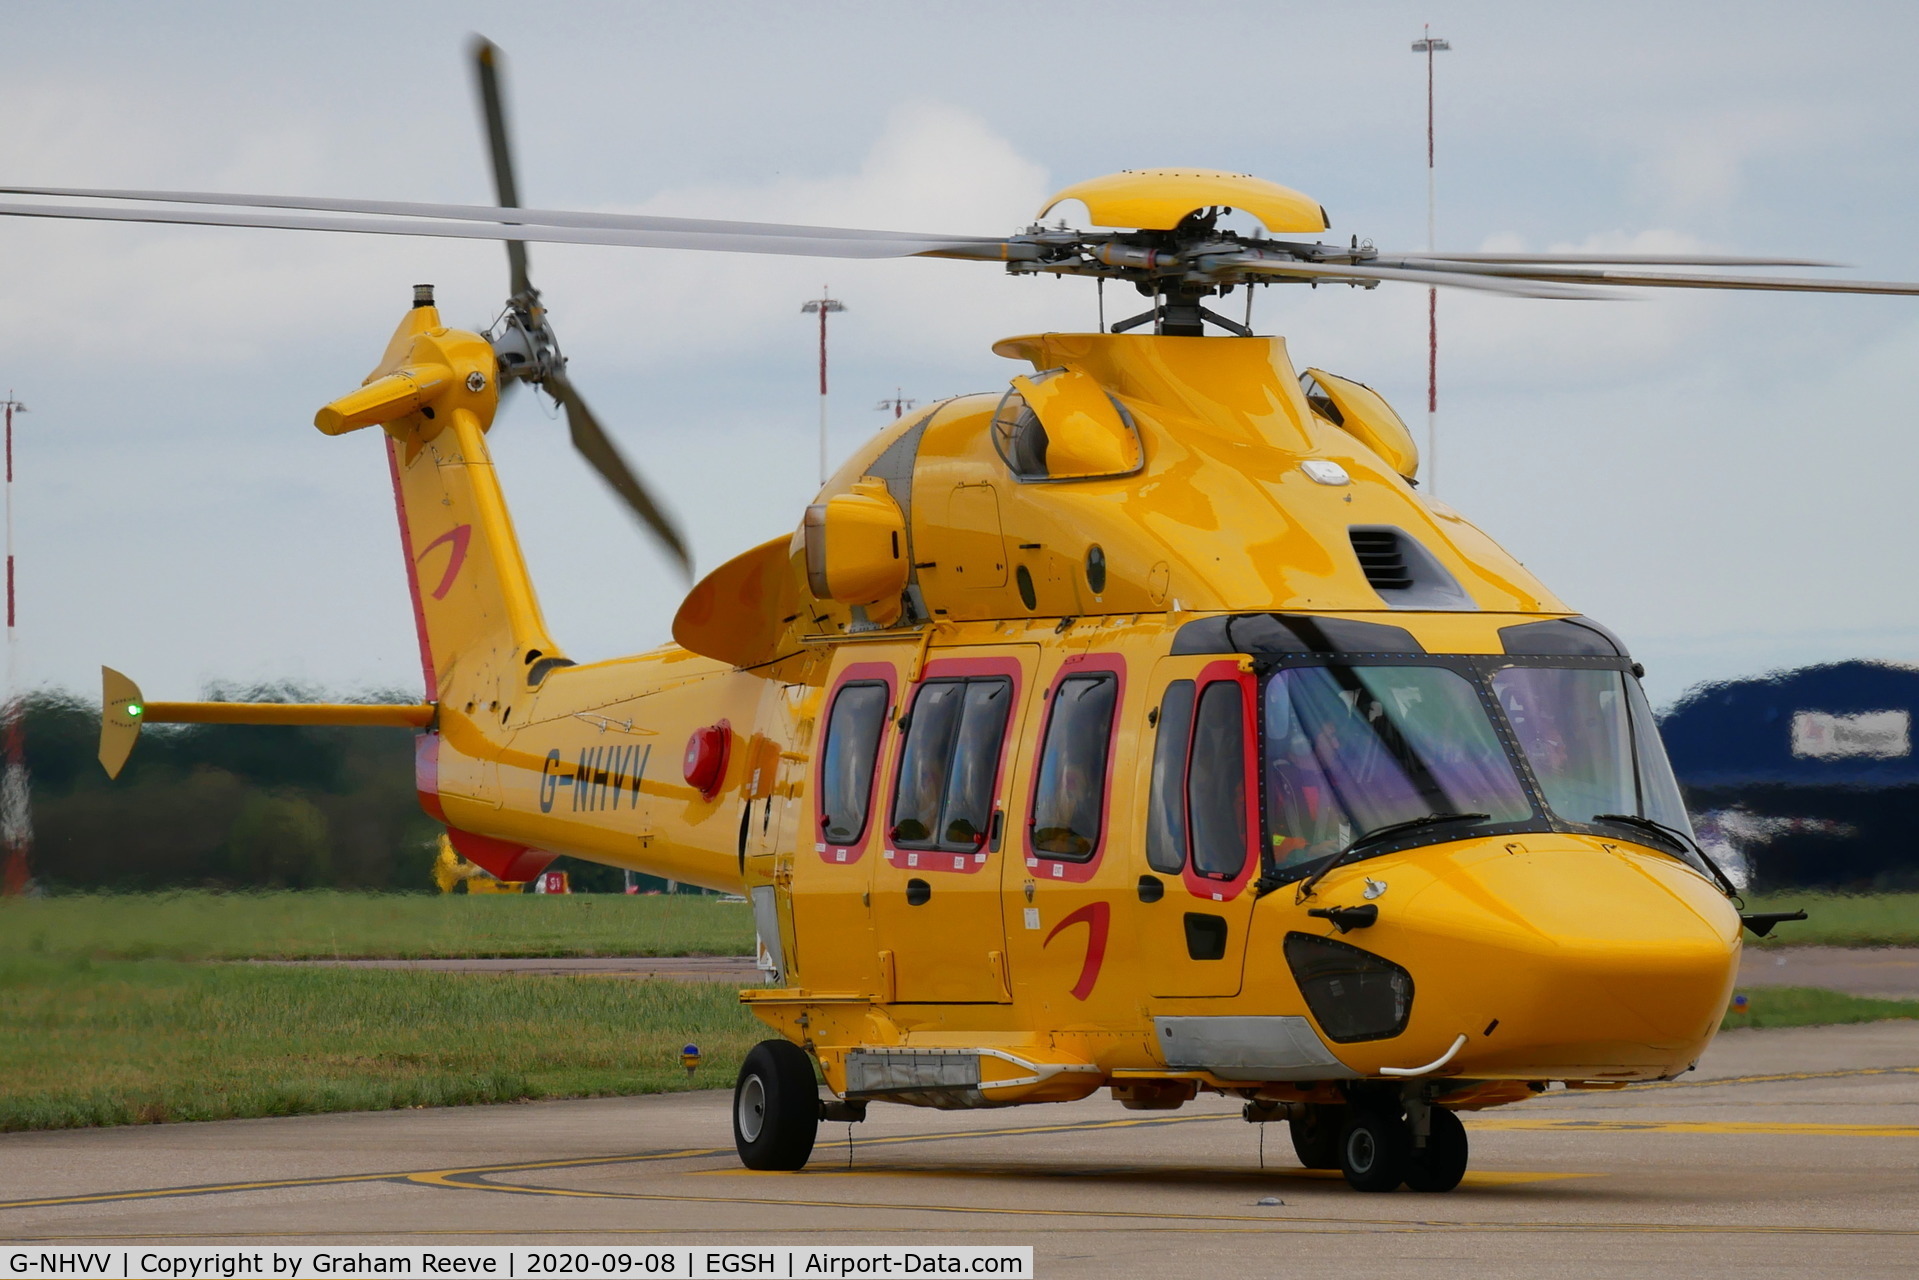 G-NHVV, 2014 Airbus Helicopters EC-175B C/N 5002, Just landed at Norwich.